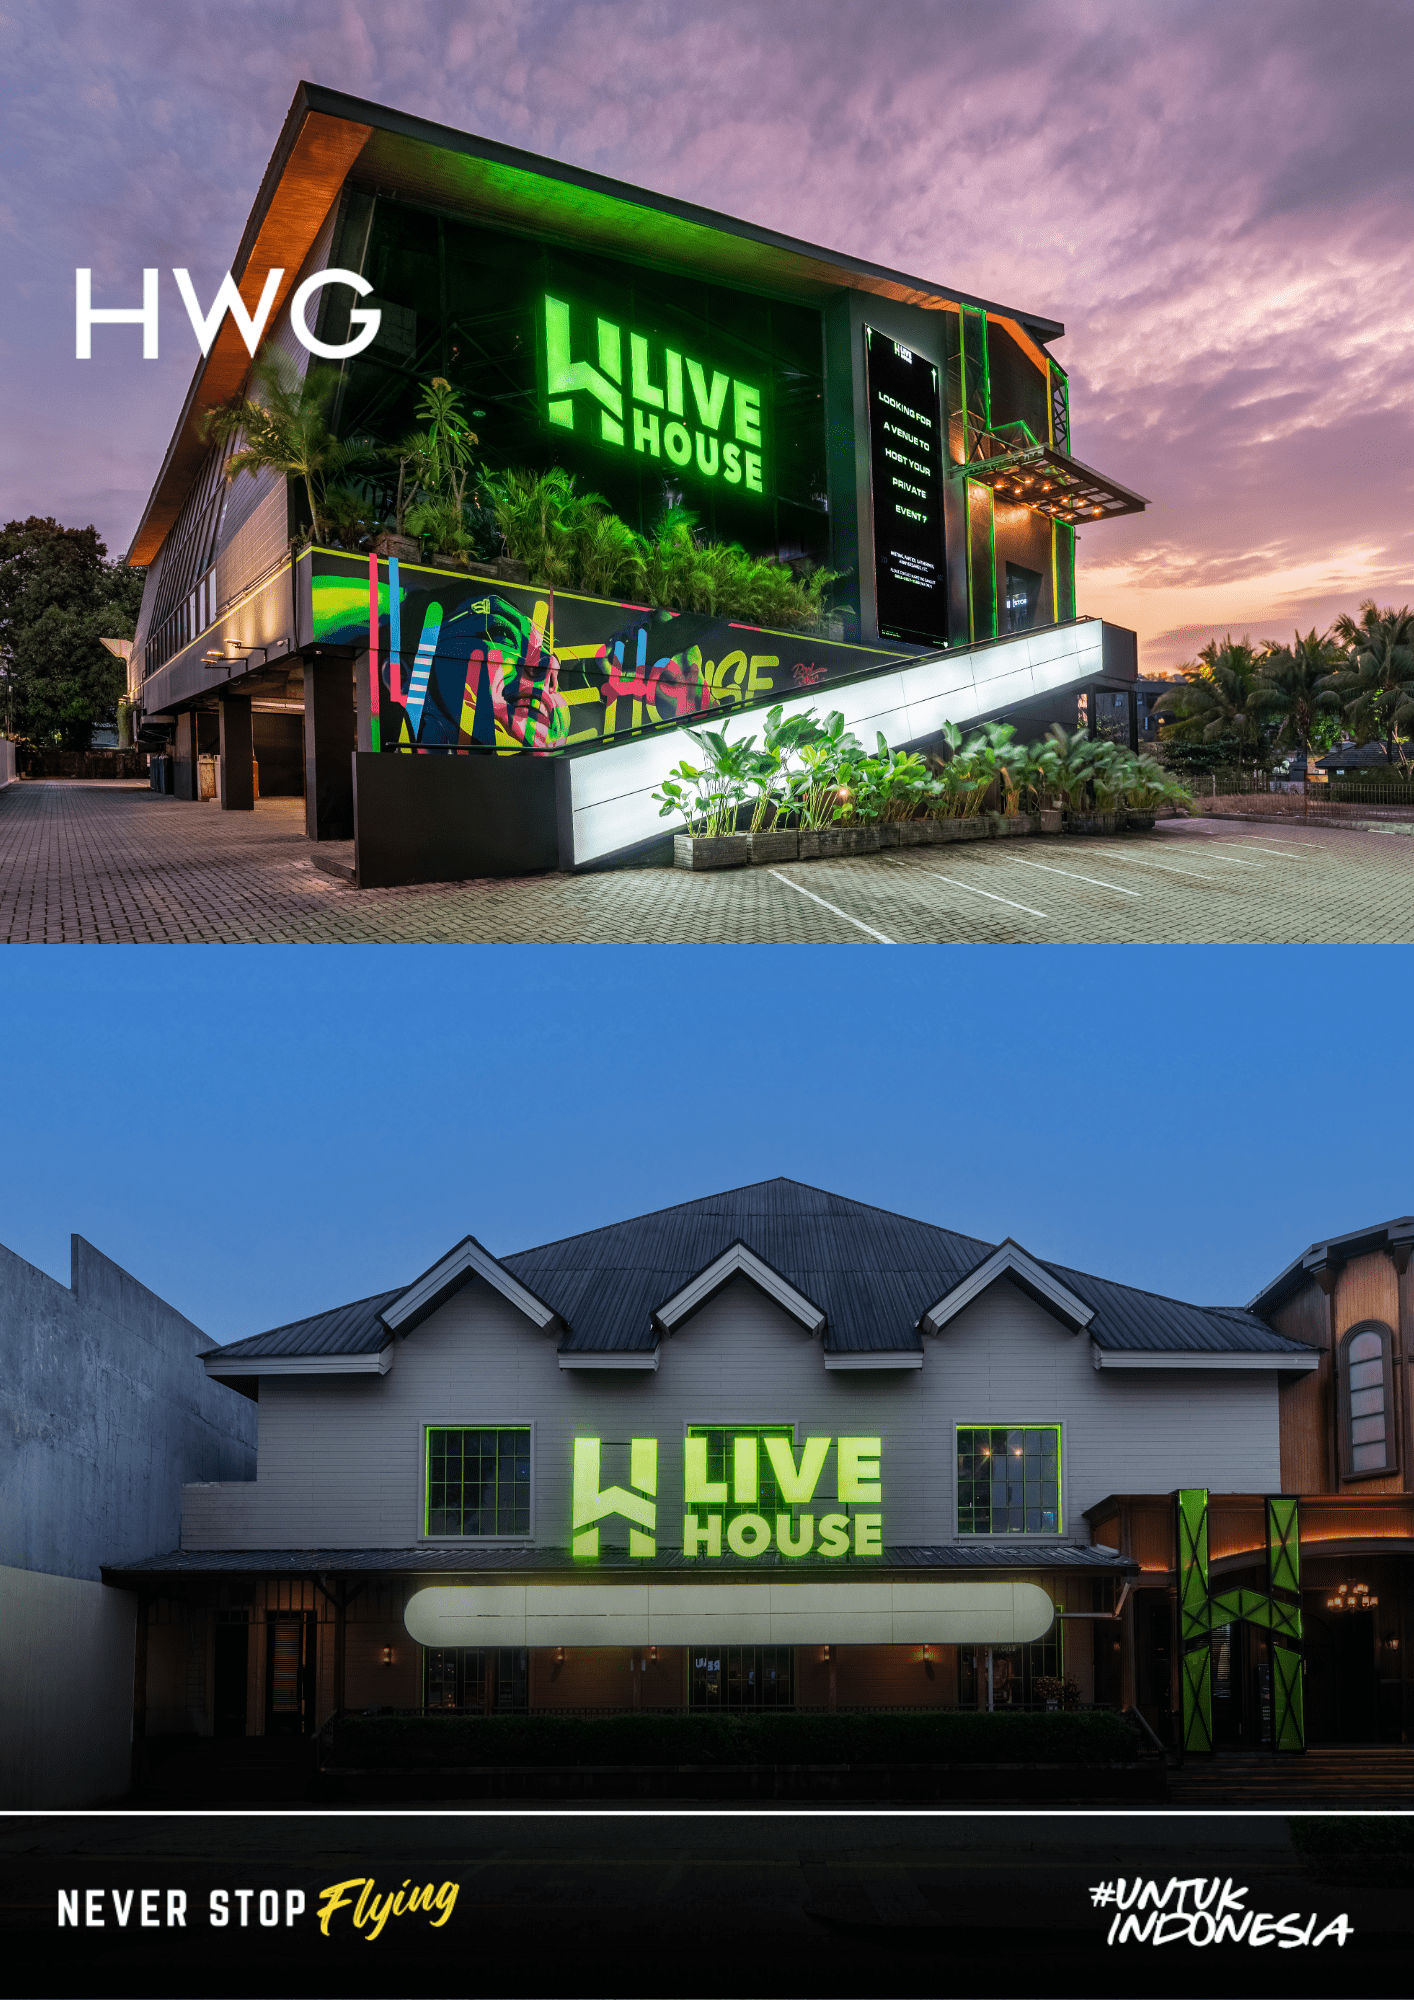 Get to Know Live House, the Exciting New Hangout Spot in Jakarta!